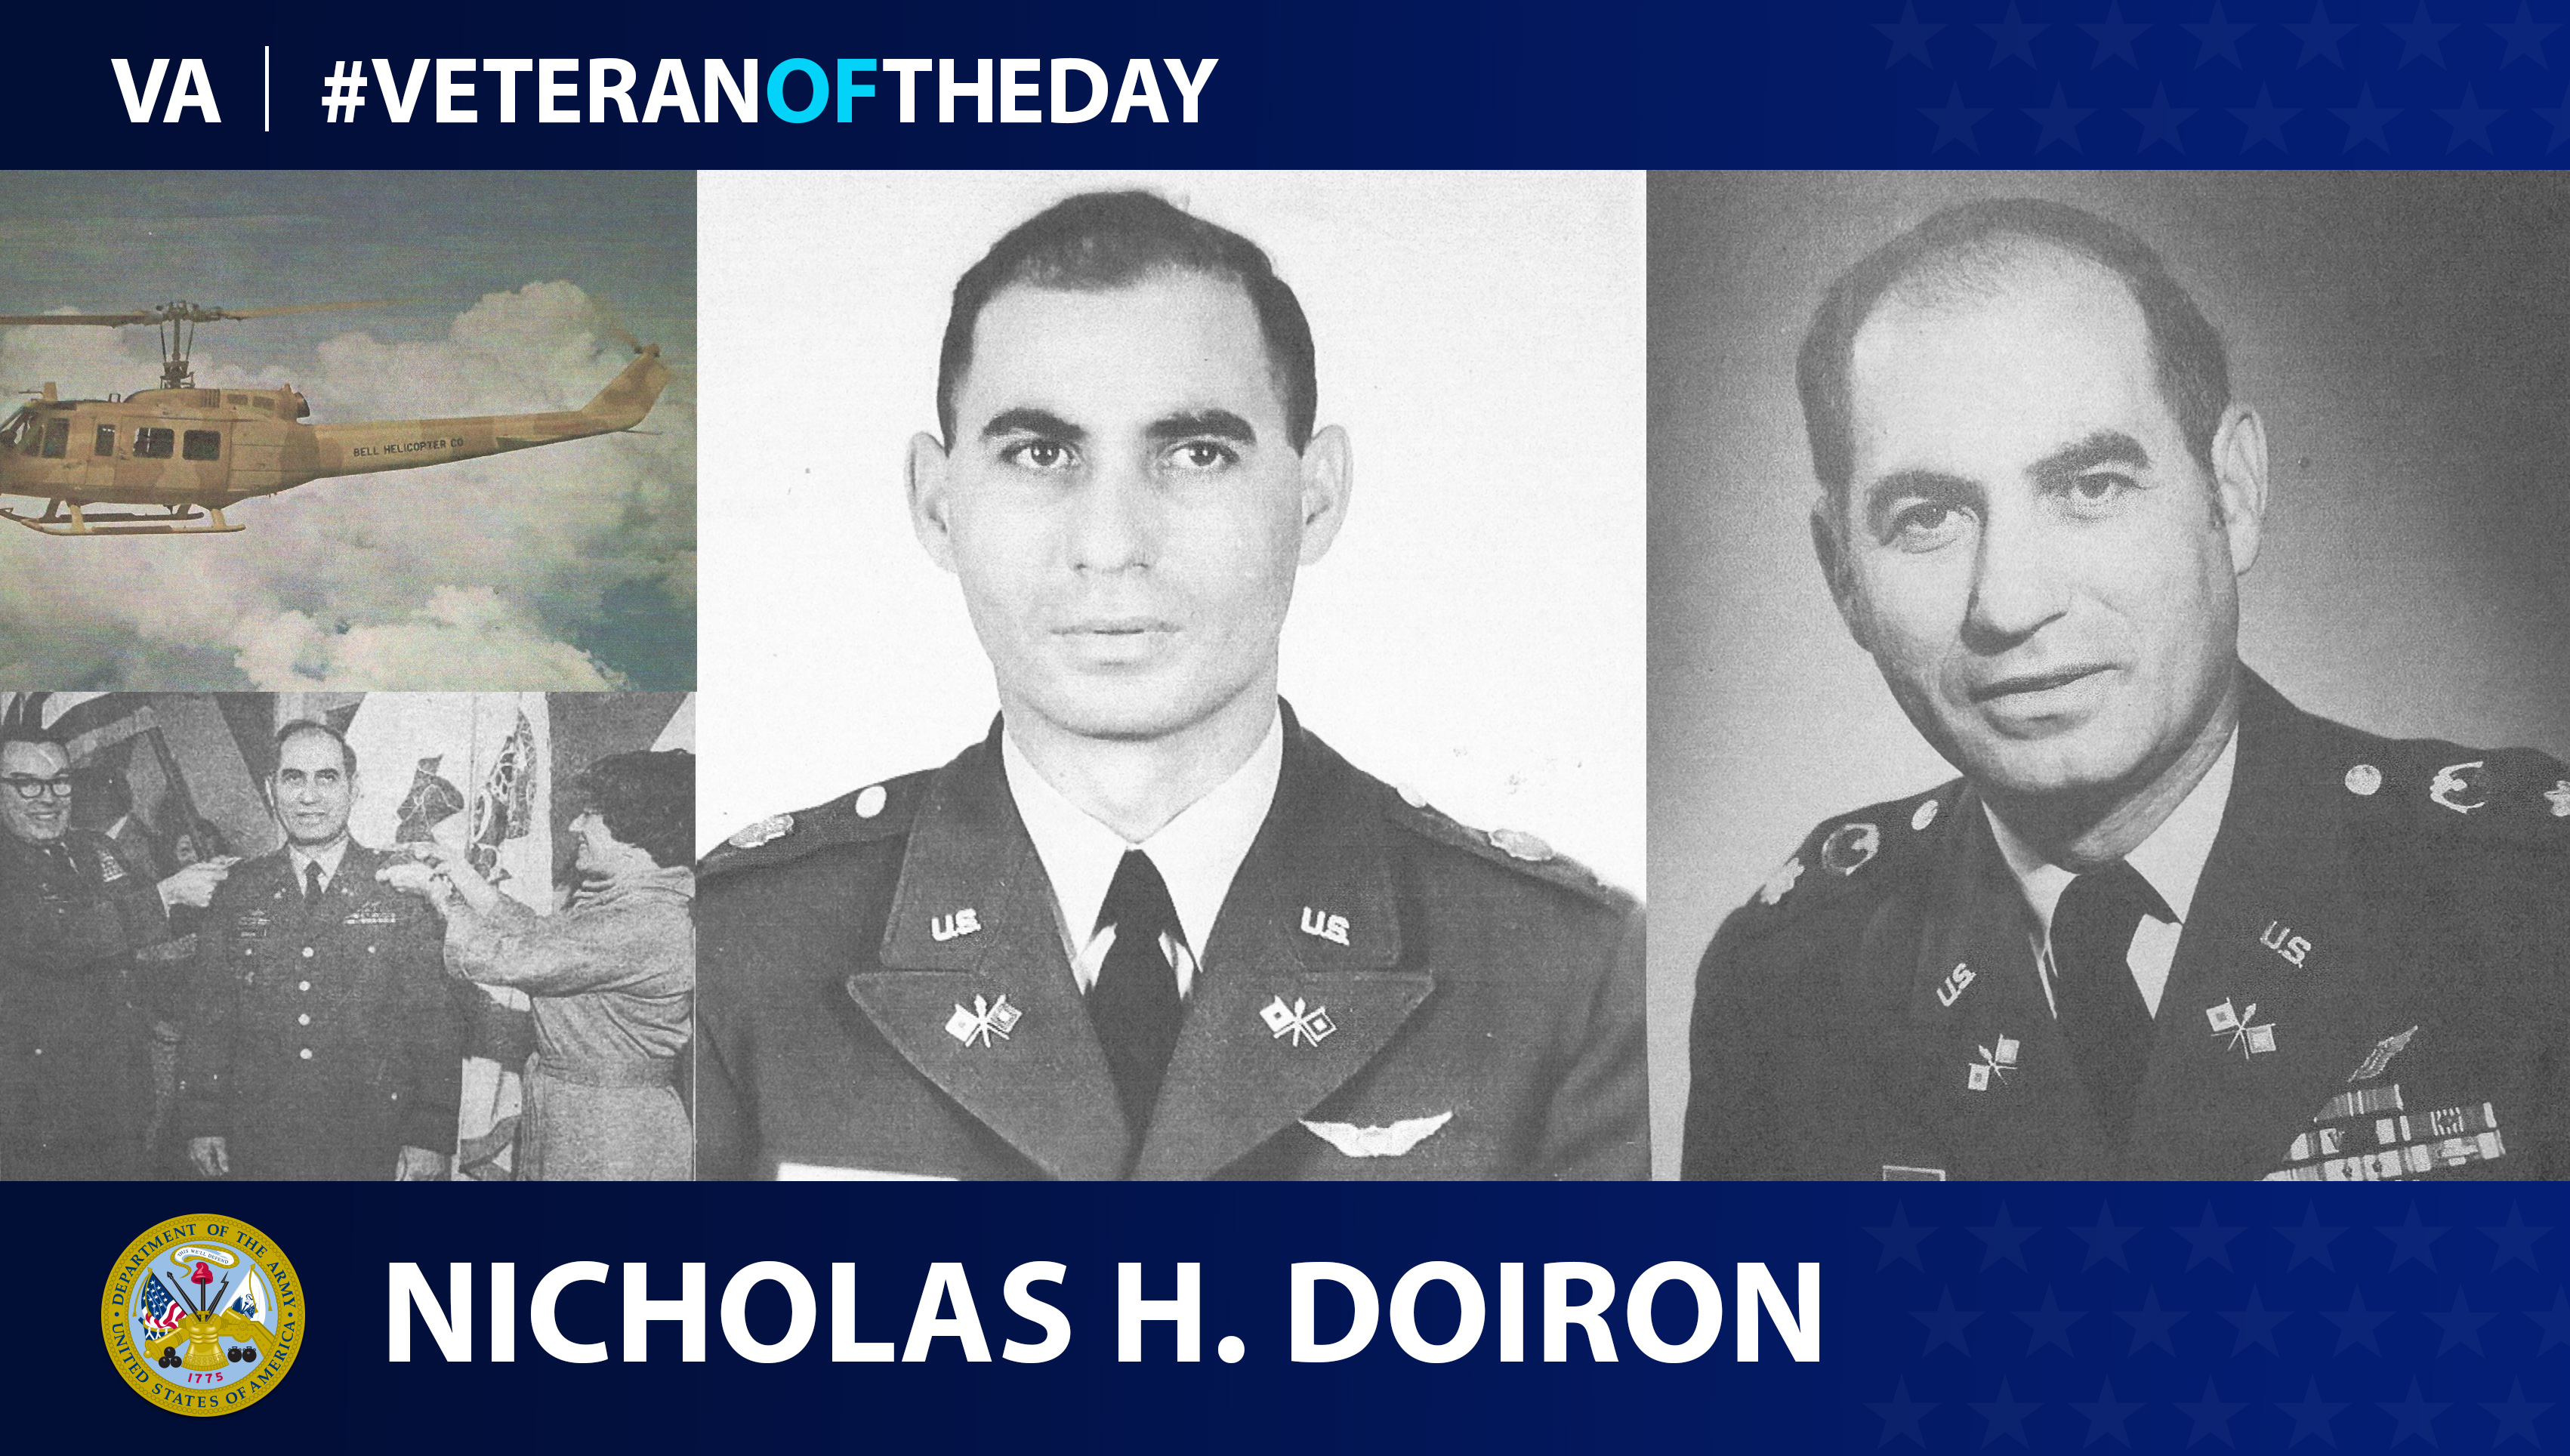 Army Veteran Nicholas H. Doiron is today's Veteran of the Day.